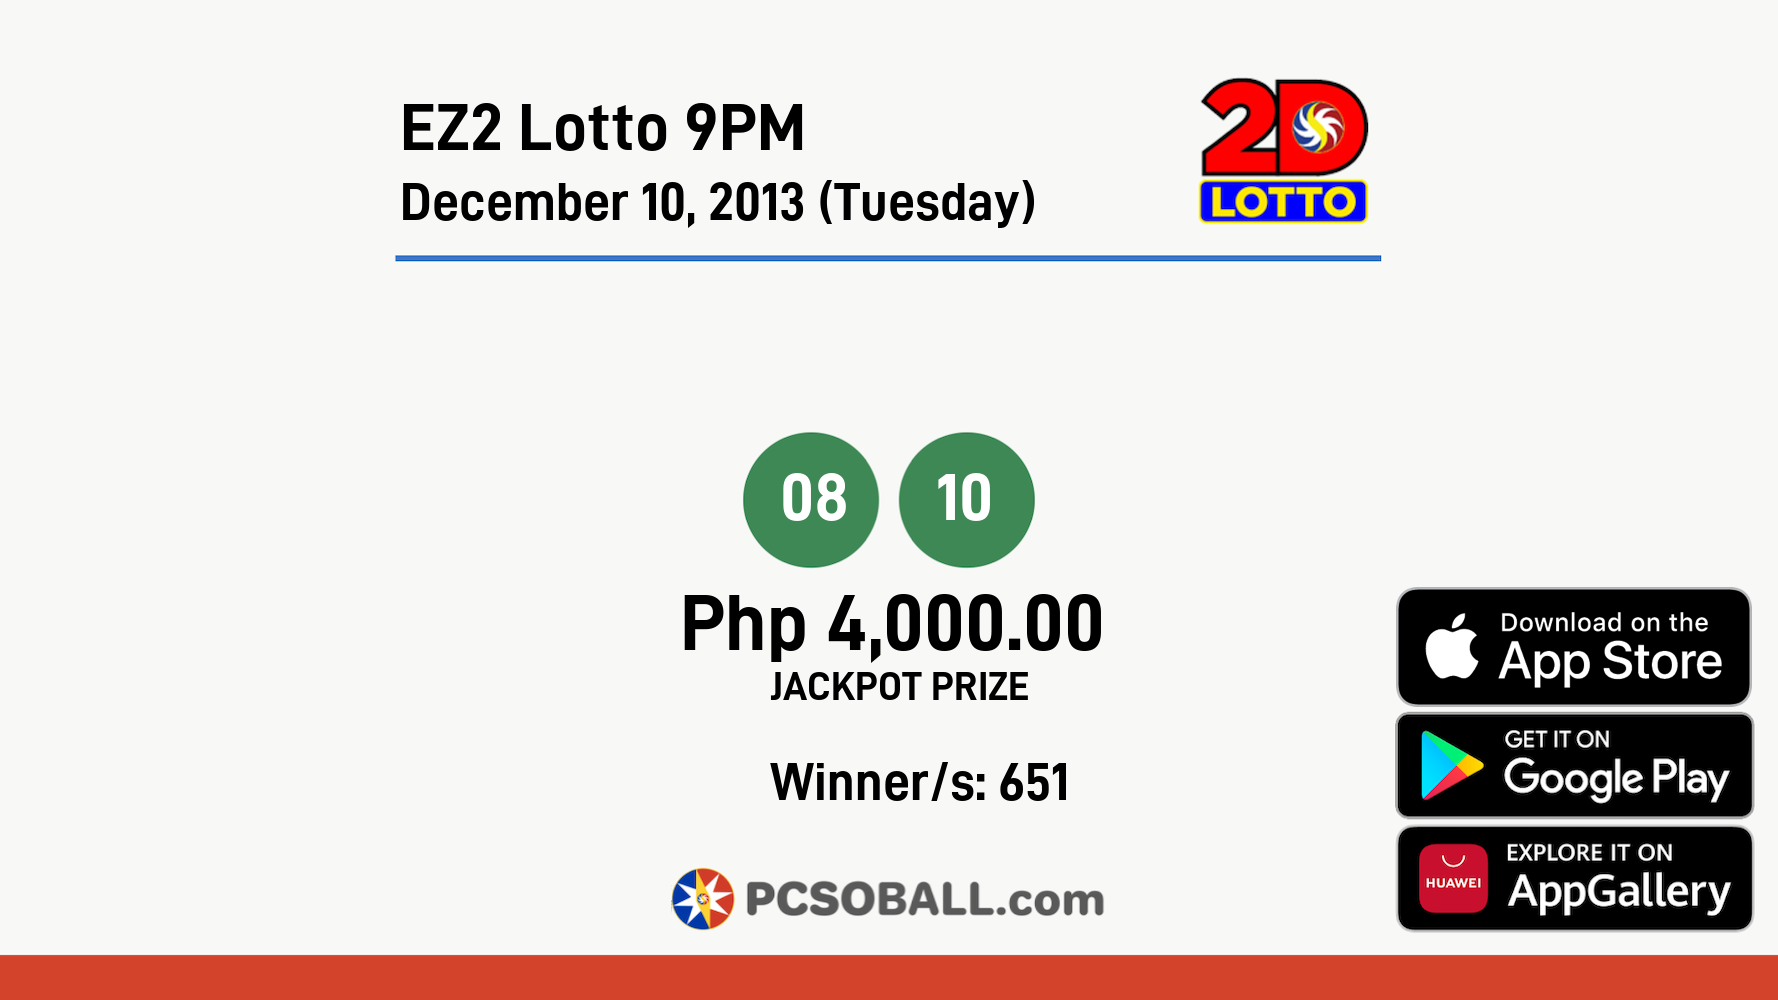 EZ2 Lotto 9PM December 10, 2013 (Tuesday) Result